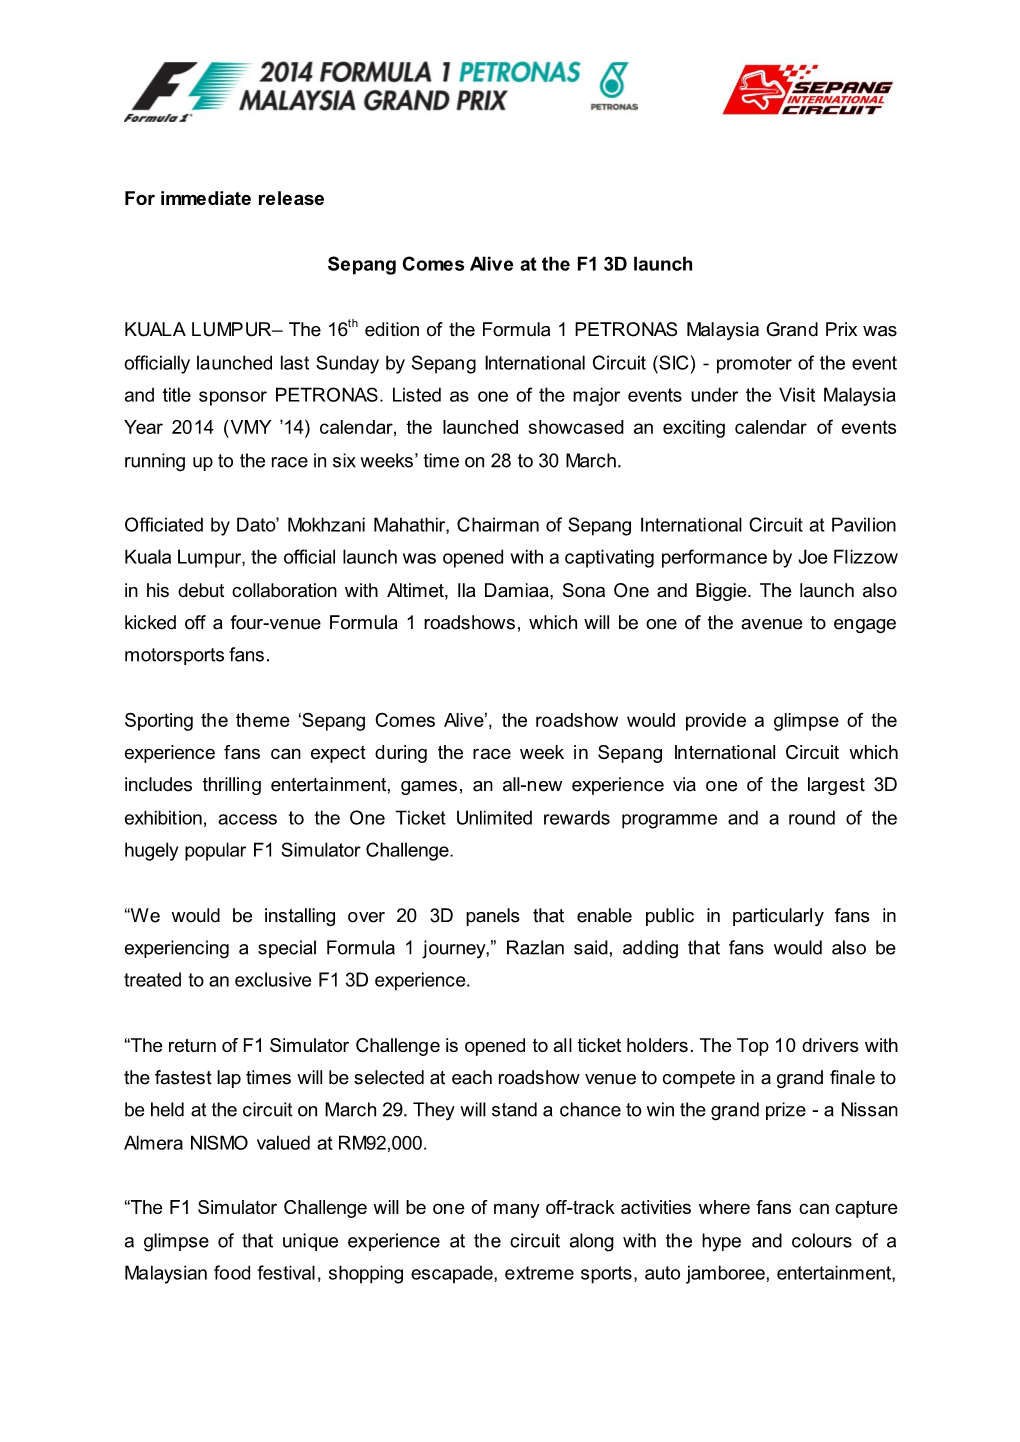 For Immediate Release Sepang Comes Alive at the F1 3D Launch